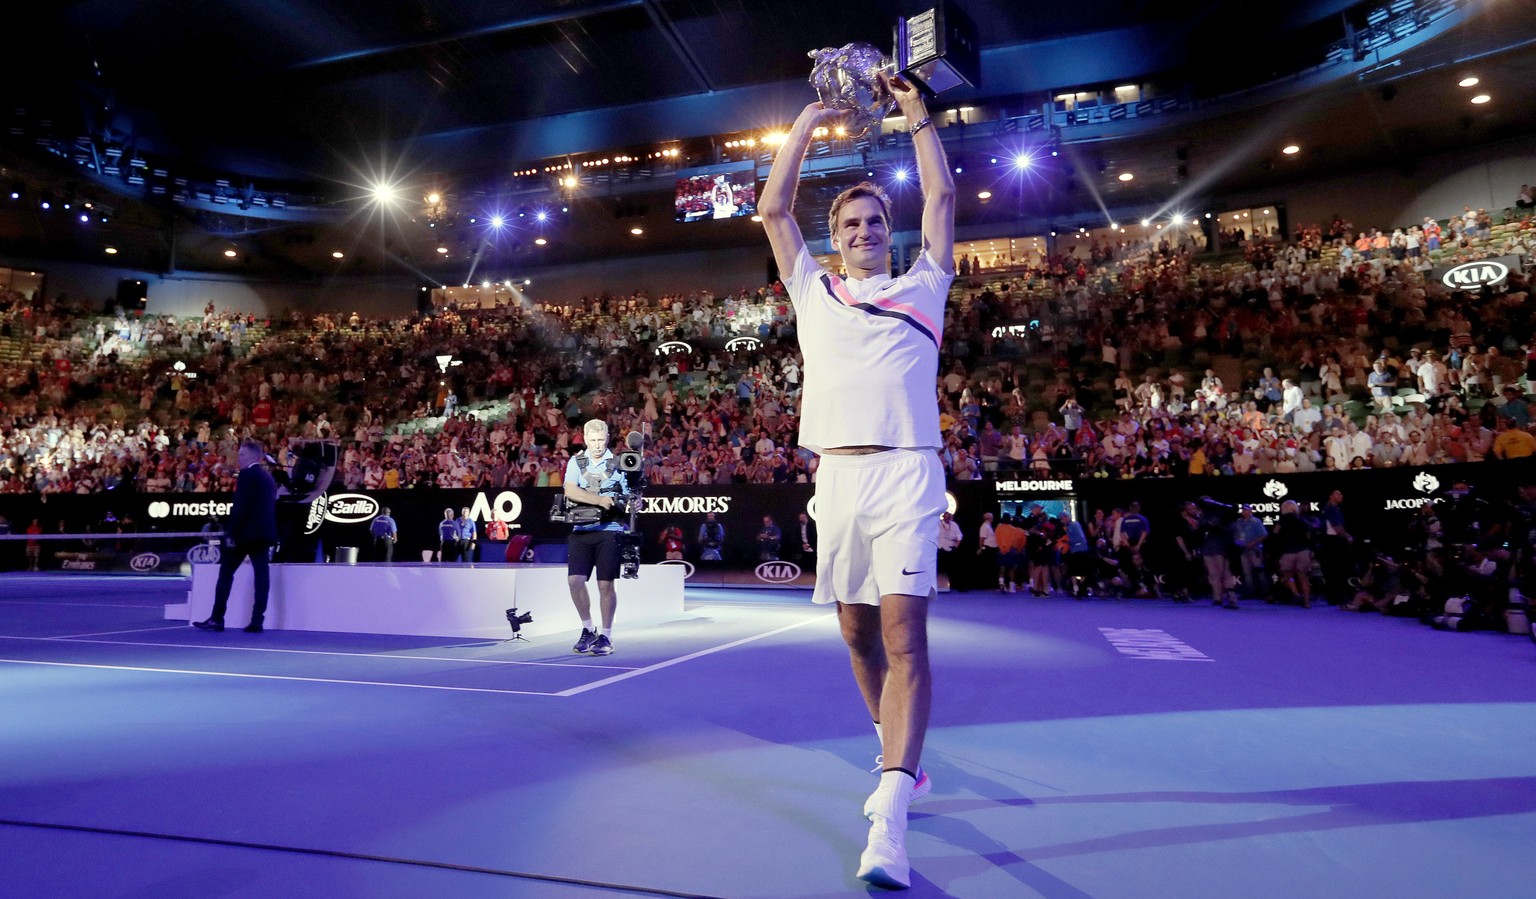 Switzerland&#039;s Roger Federer holds his trophy up after defeating Croatia&#039;s Marin Cilic in the men&#039;s singles final at the Australian Open tennis championships in Melbourne, Australia, Sun ...